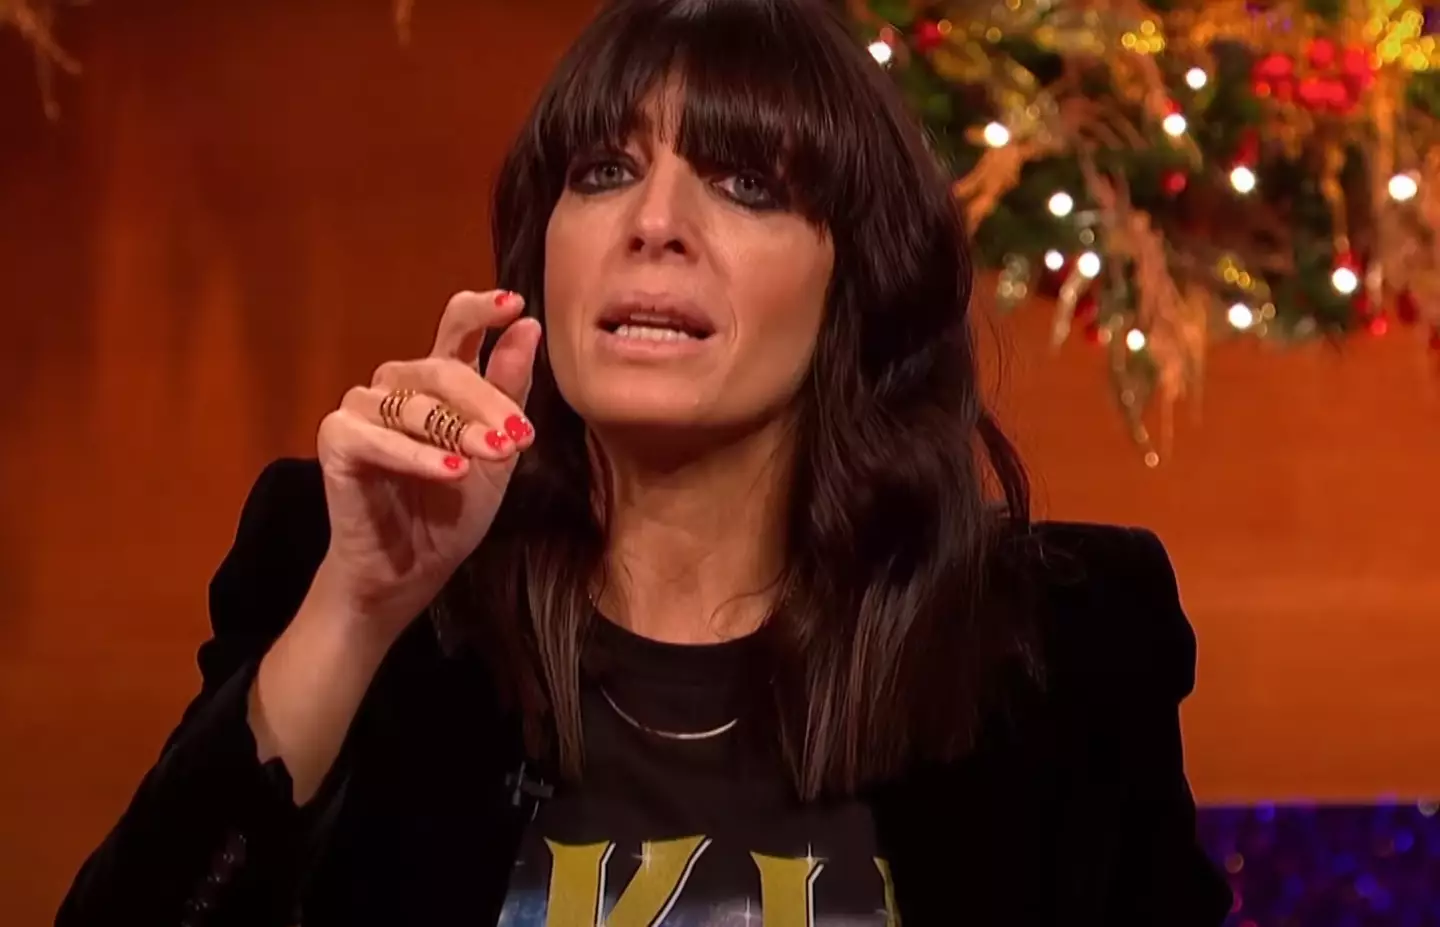 Claudia Winkleman didn't always have her iconic fringe and fake tan look.